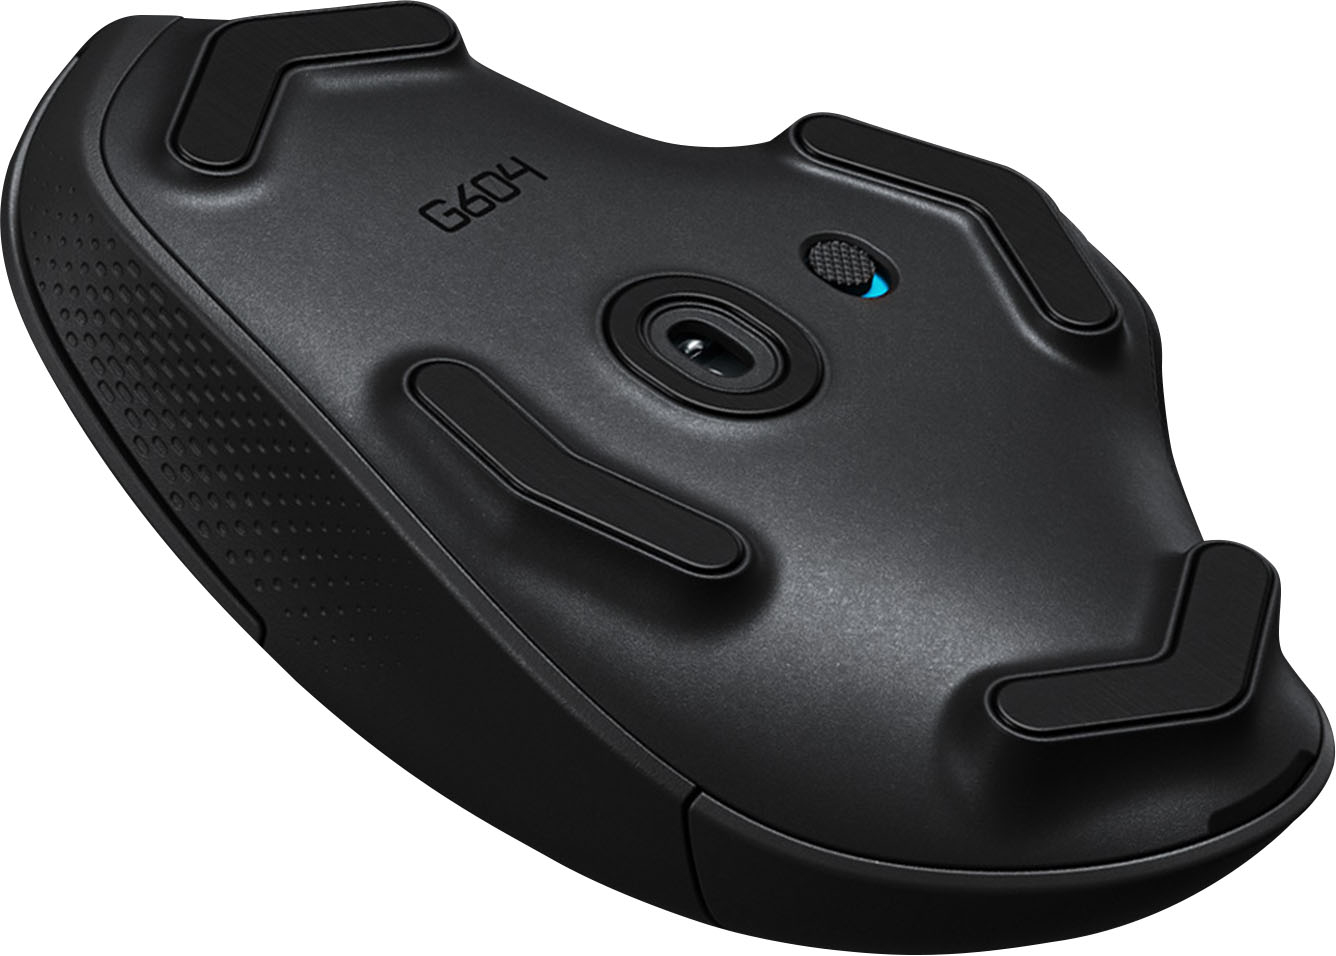 Logitech G604 Wireless Optical Gaming Mouse Black 910 005622 Best Buy